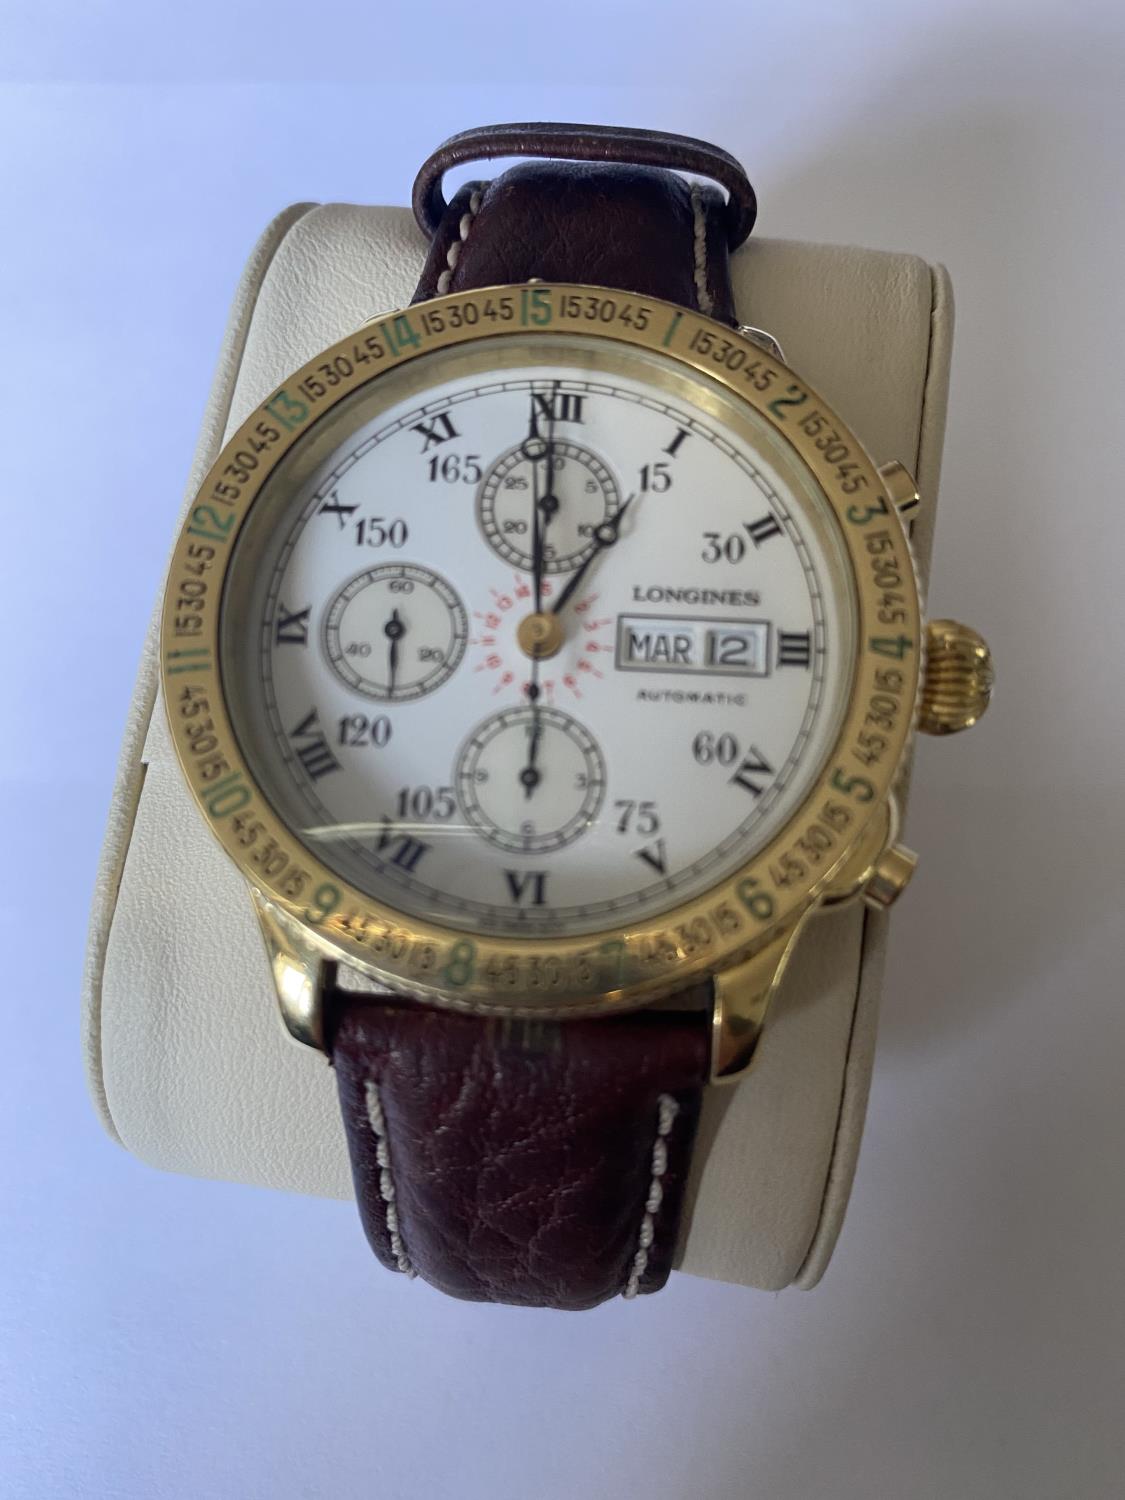 A LONGINES LINDEBERGH HOUR ANGLE WRIST WATCH WITH SOLID YELLOW GOLD CASE AND BEZEL, AUTOMATIC - Image 2 of 12